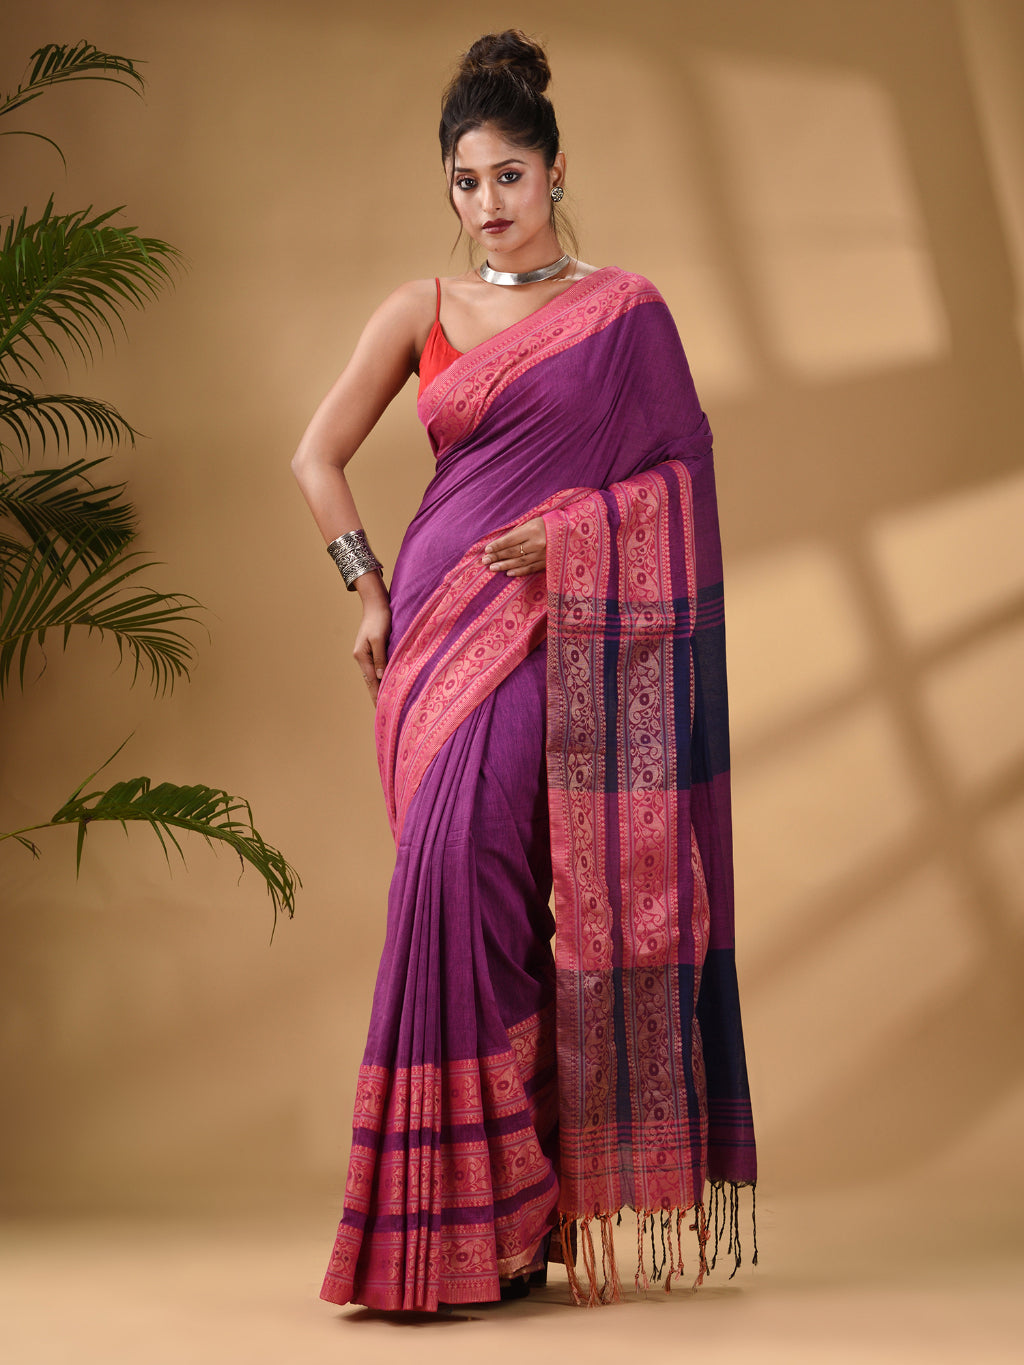 Violet Cotton Handwoven Soft Saree With Paisley Border